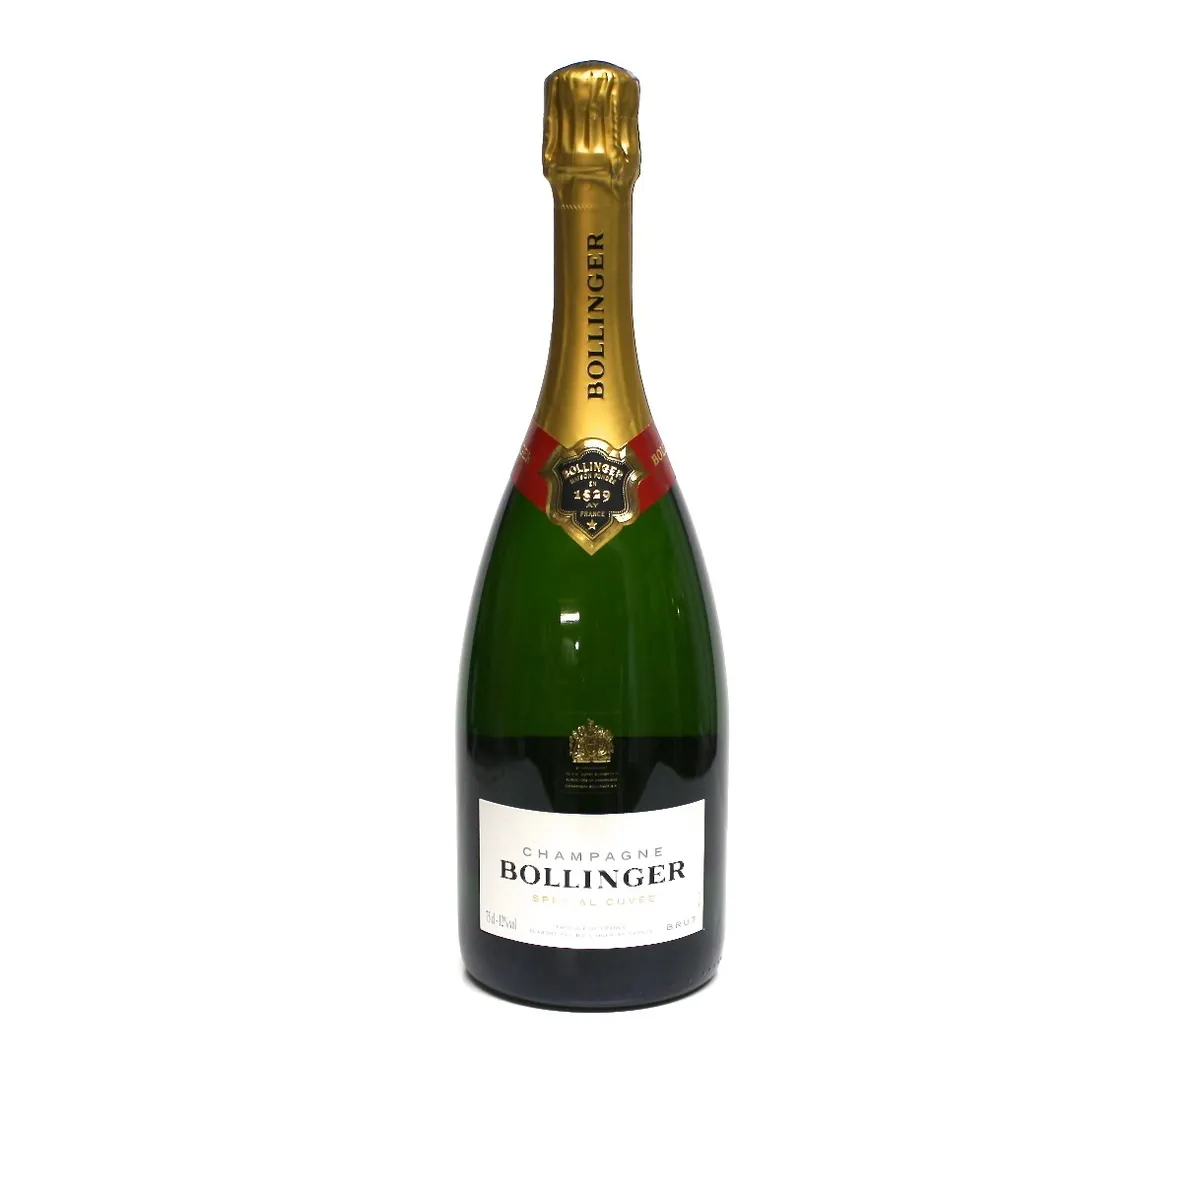 CHAMPAGNE BOLLINGER SPECIAL CUVEE 75CL